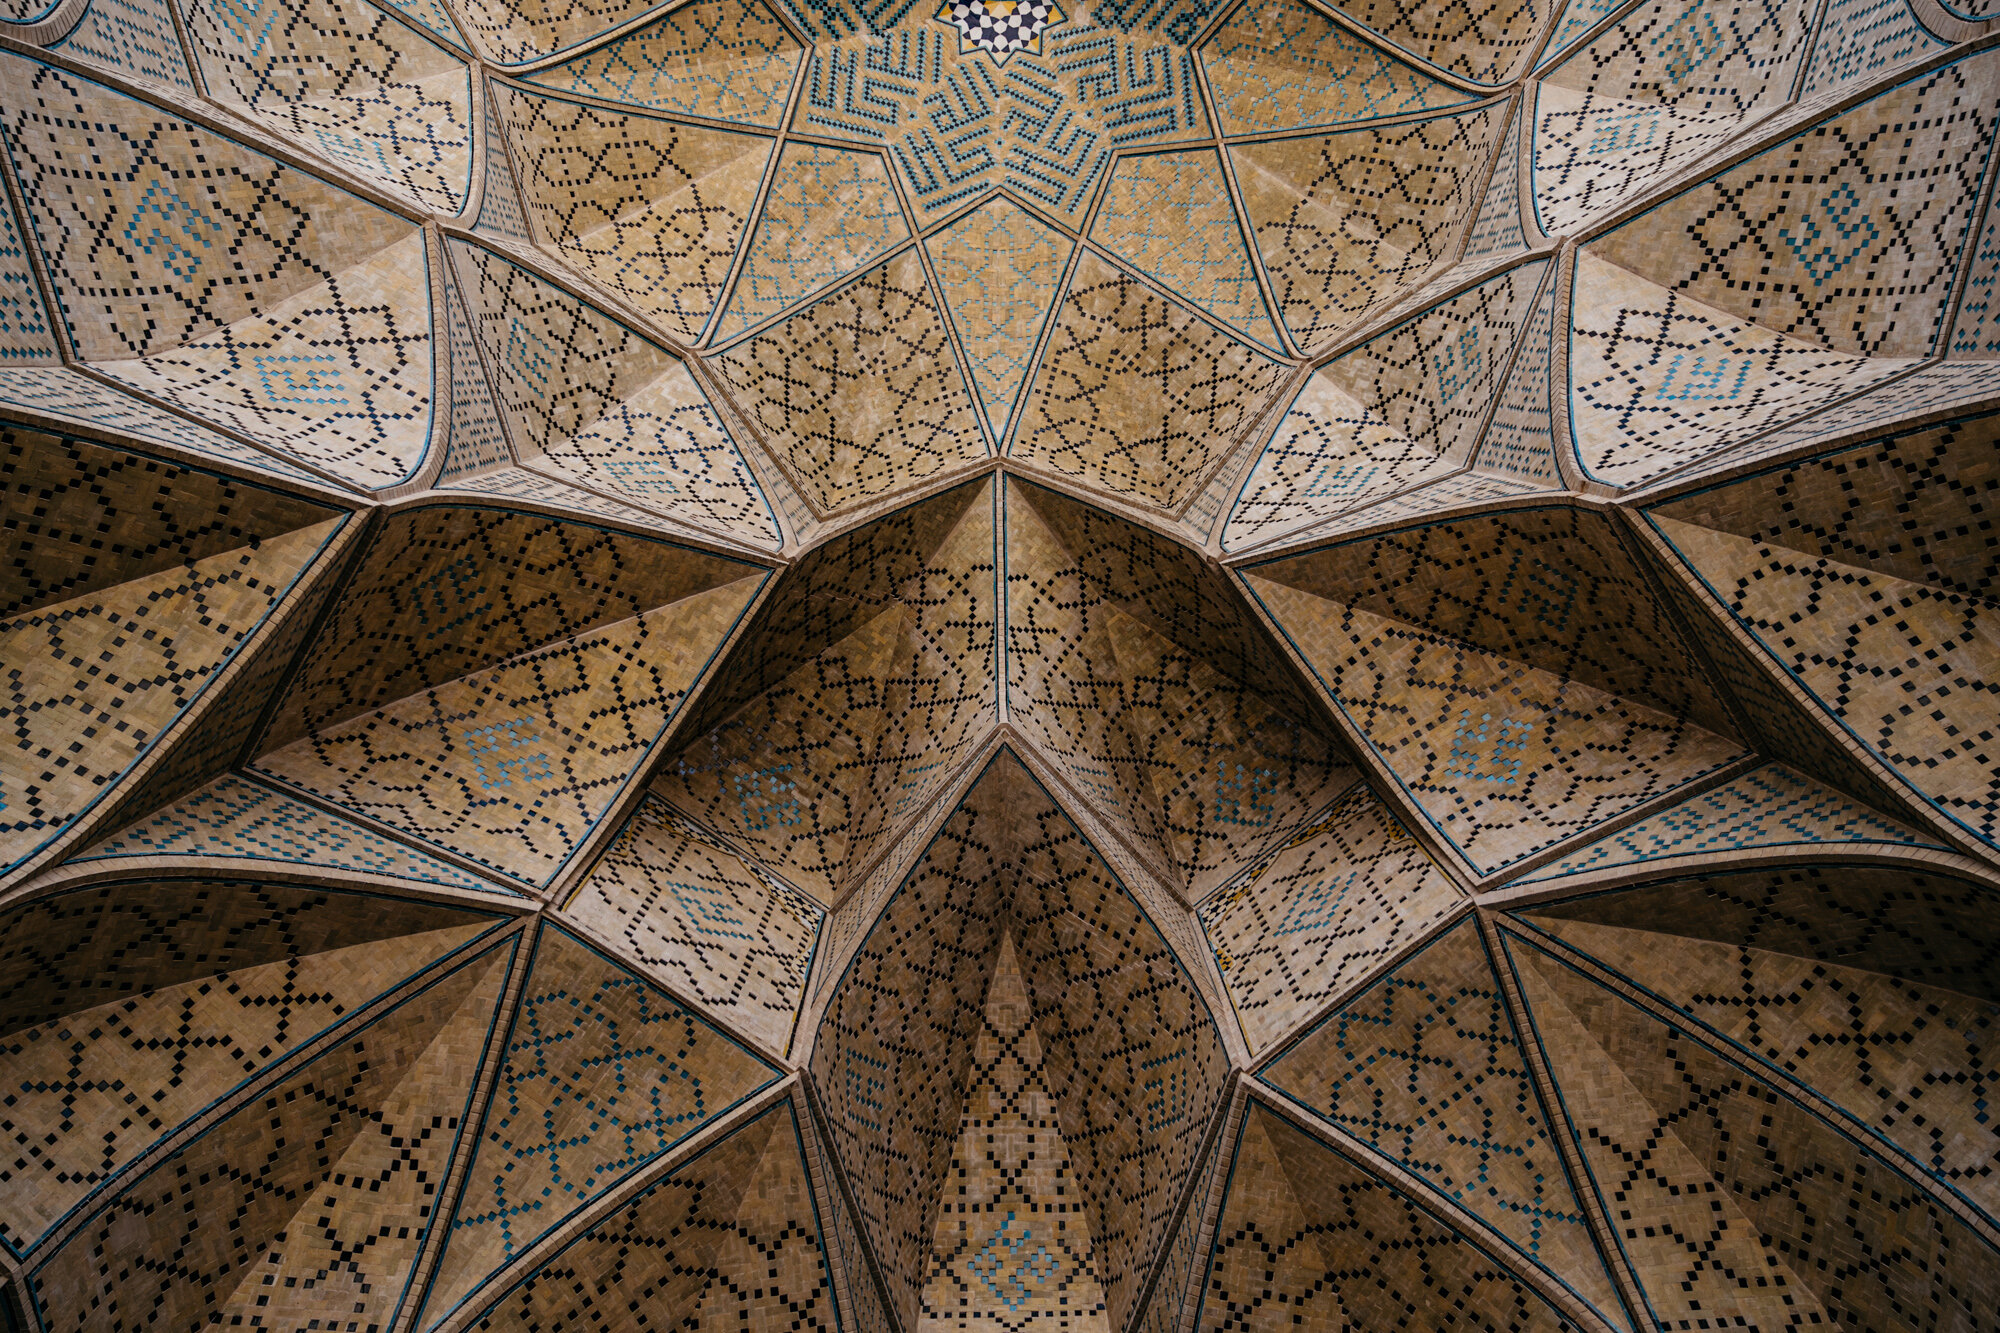  Ceiling details from the Jameh Mosque, Isfahan 